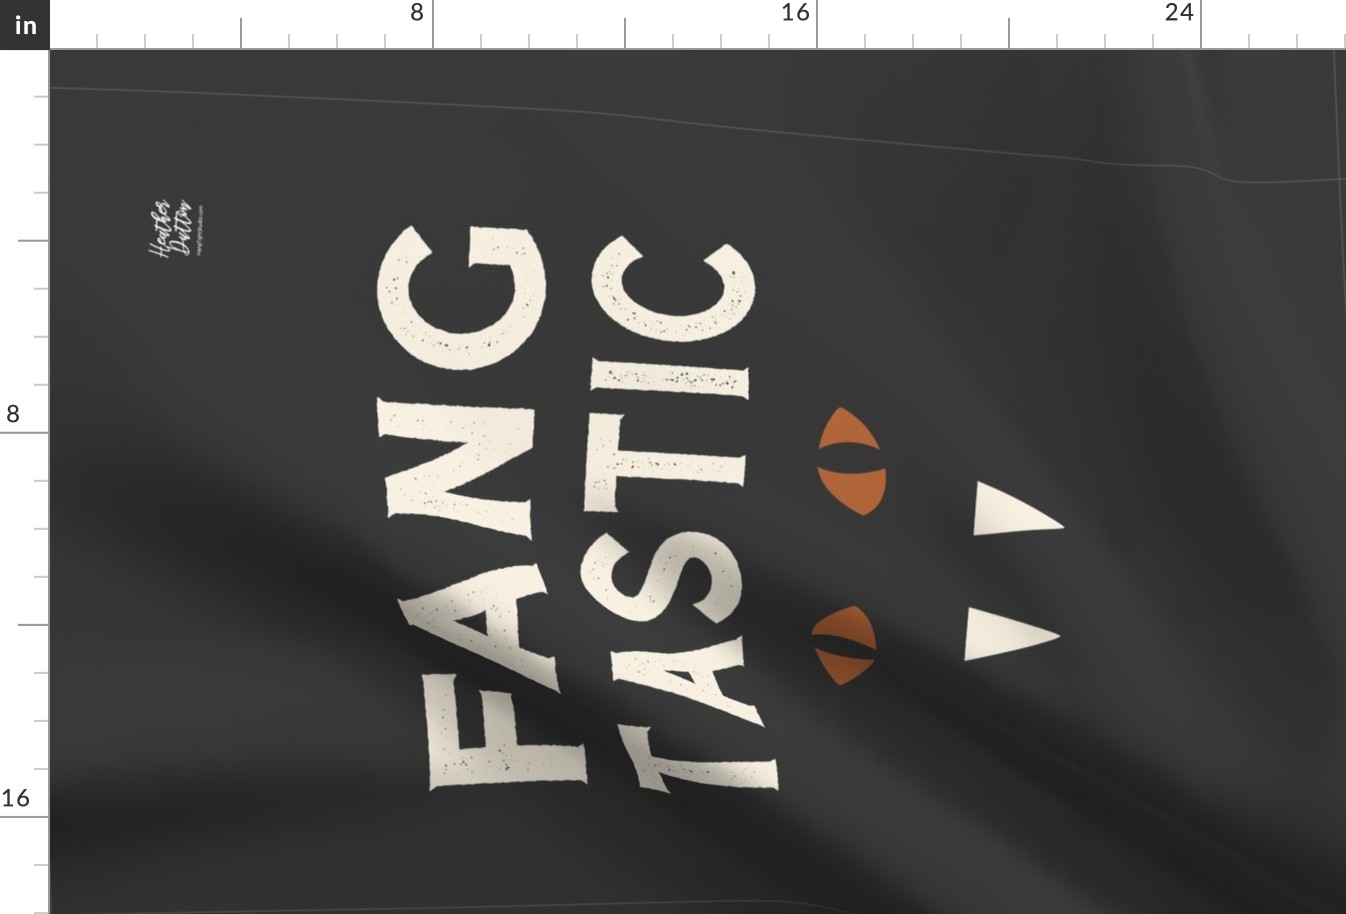 Fang-Tastic Halloween Typography Tea Towel and Wall Hanging Soft Black Ivory